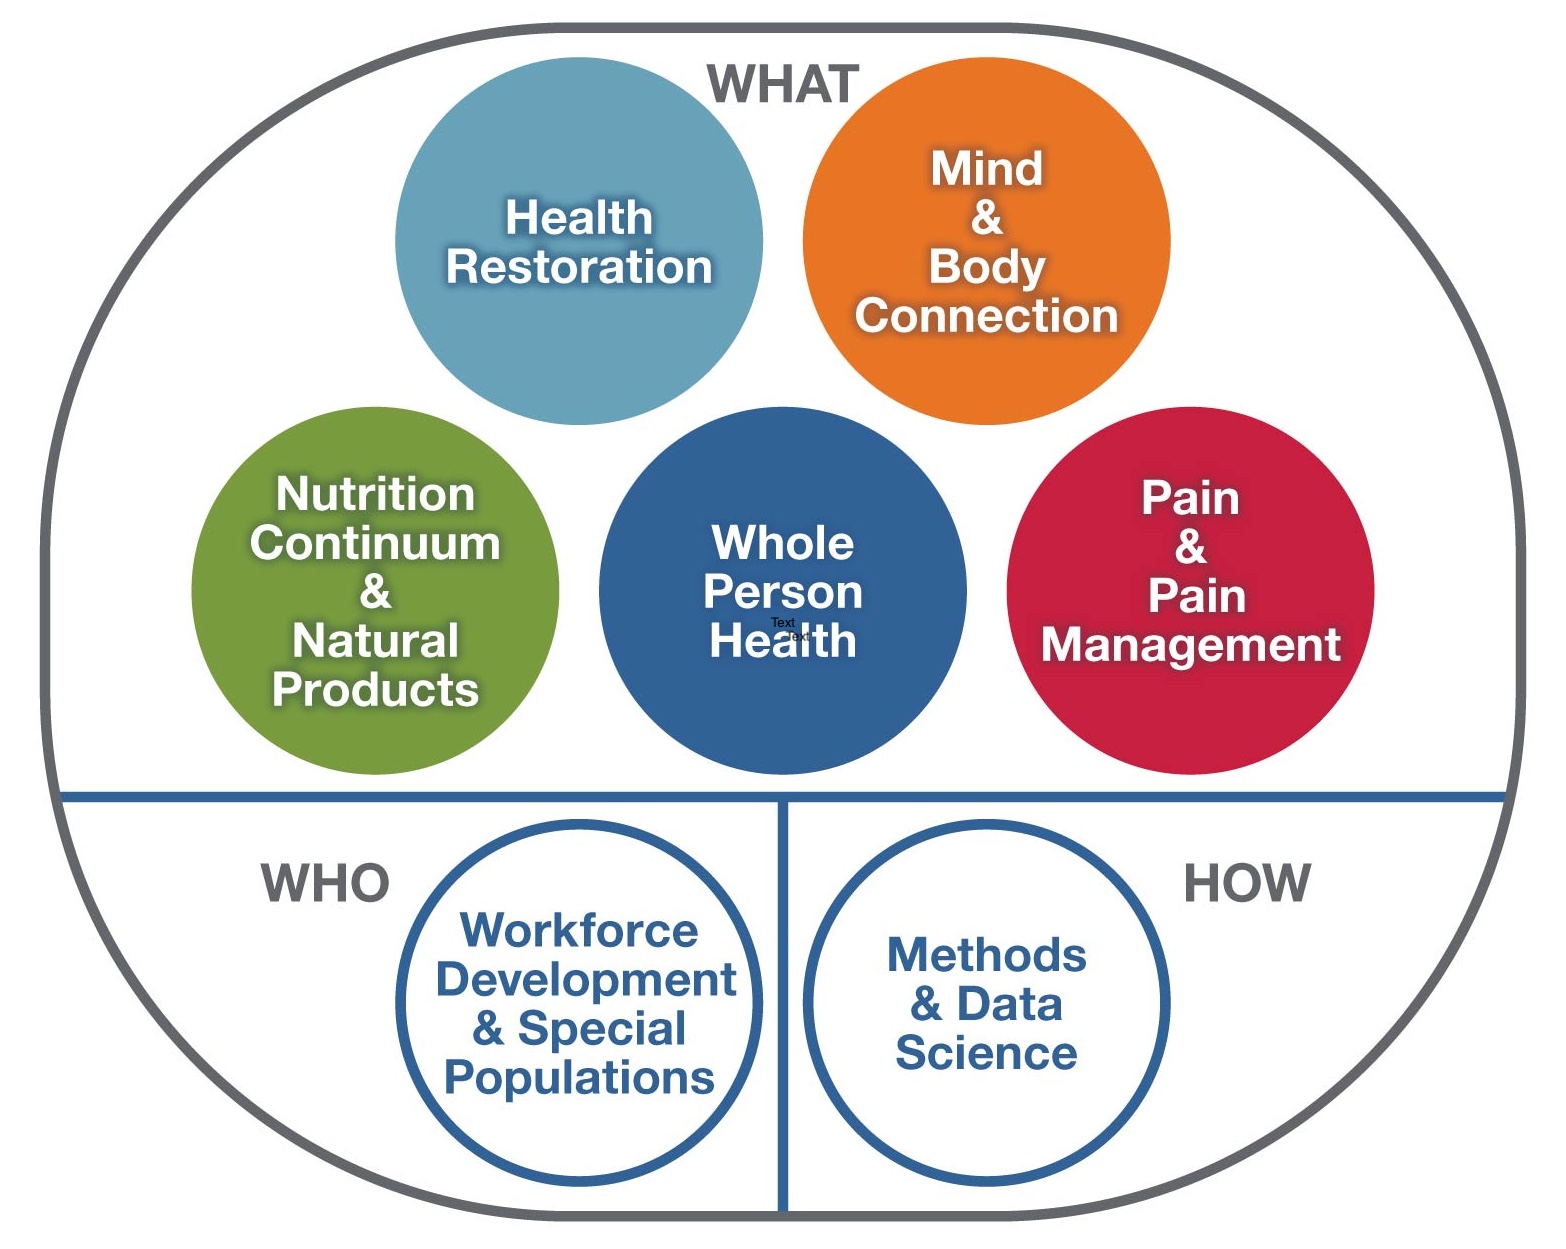 Image depicts seven main research themes, with Whole Person Health at the center and six circles surrounding it that show Pain and Pain Management; Mind and Body; Health Restoration; Nutrition Continuum and Natural Products; Workforce Development and Special Populations; and Methods and Data Science. 